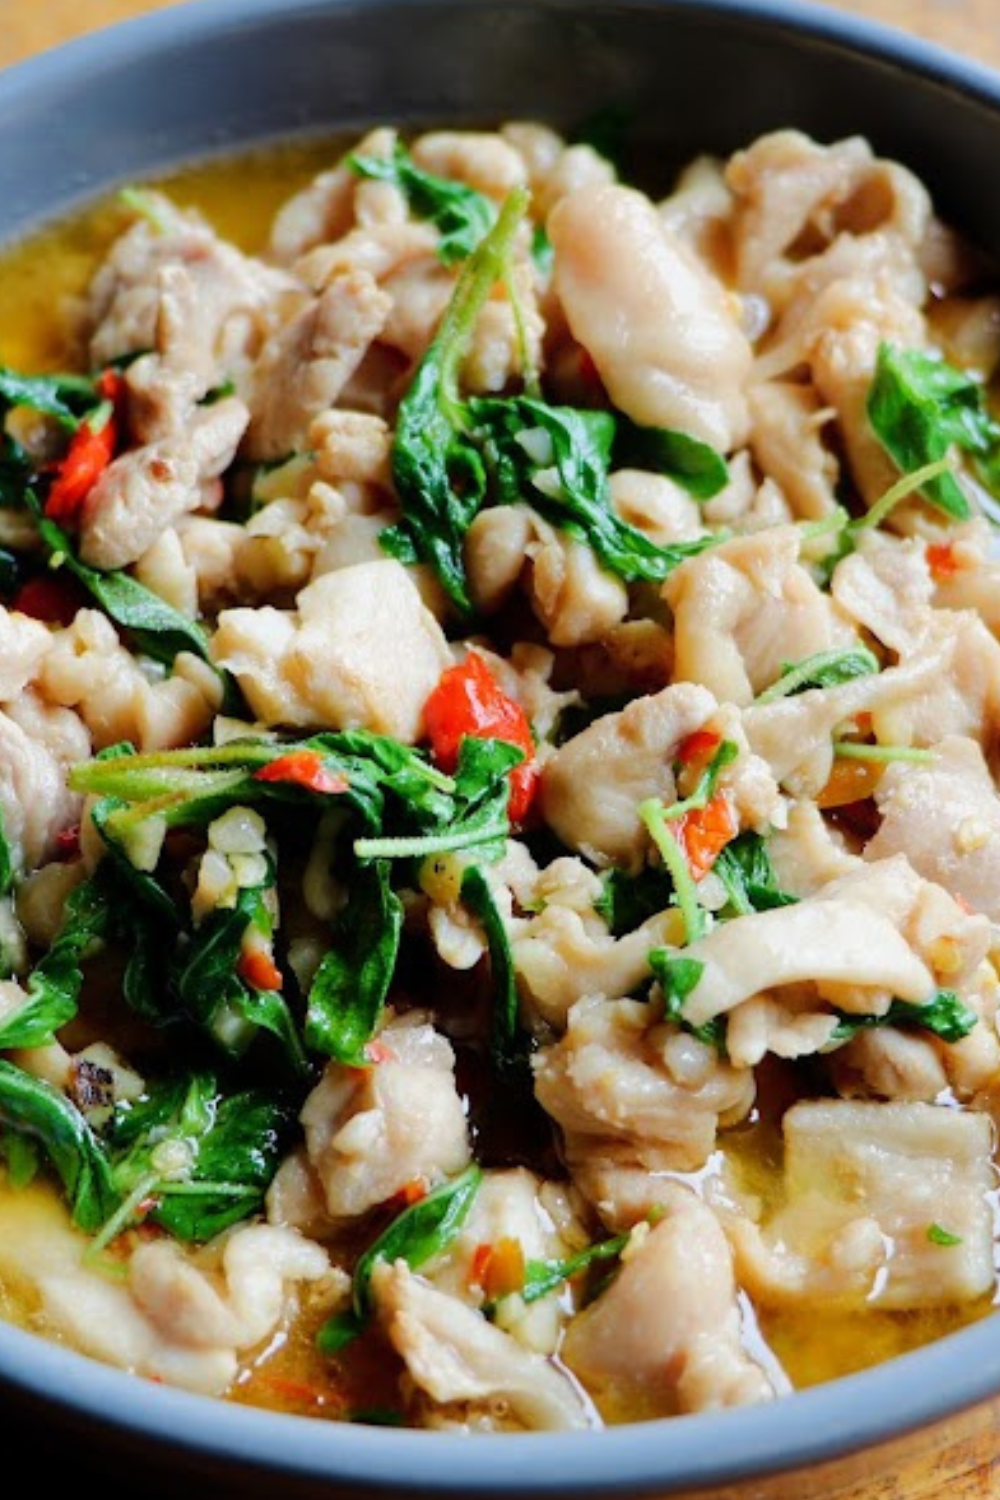 Stir fried chicken with holy basil